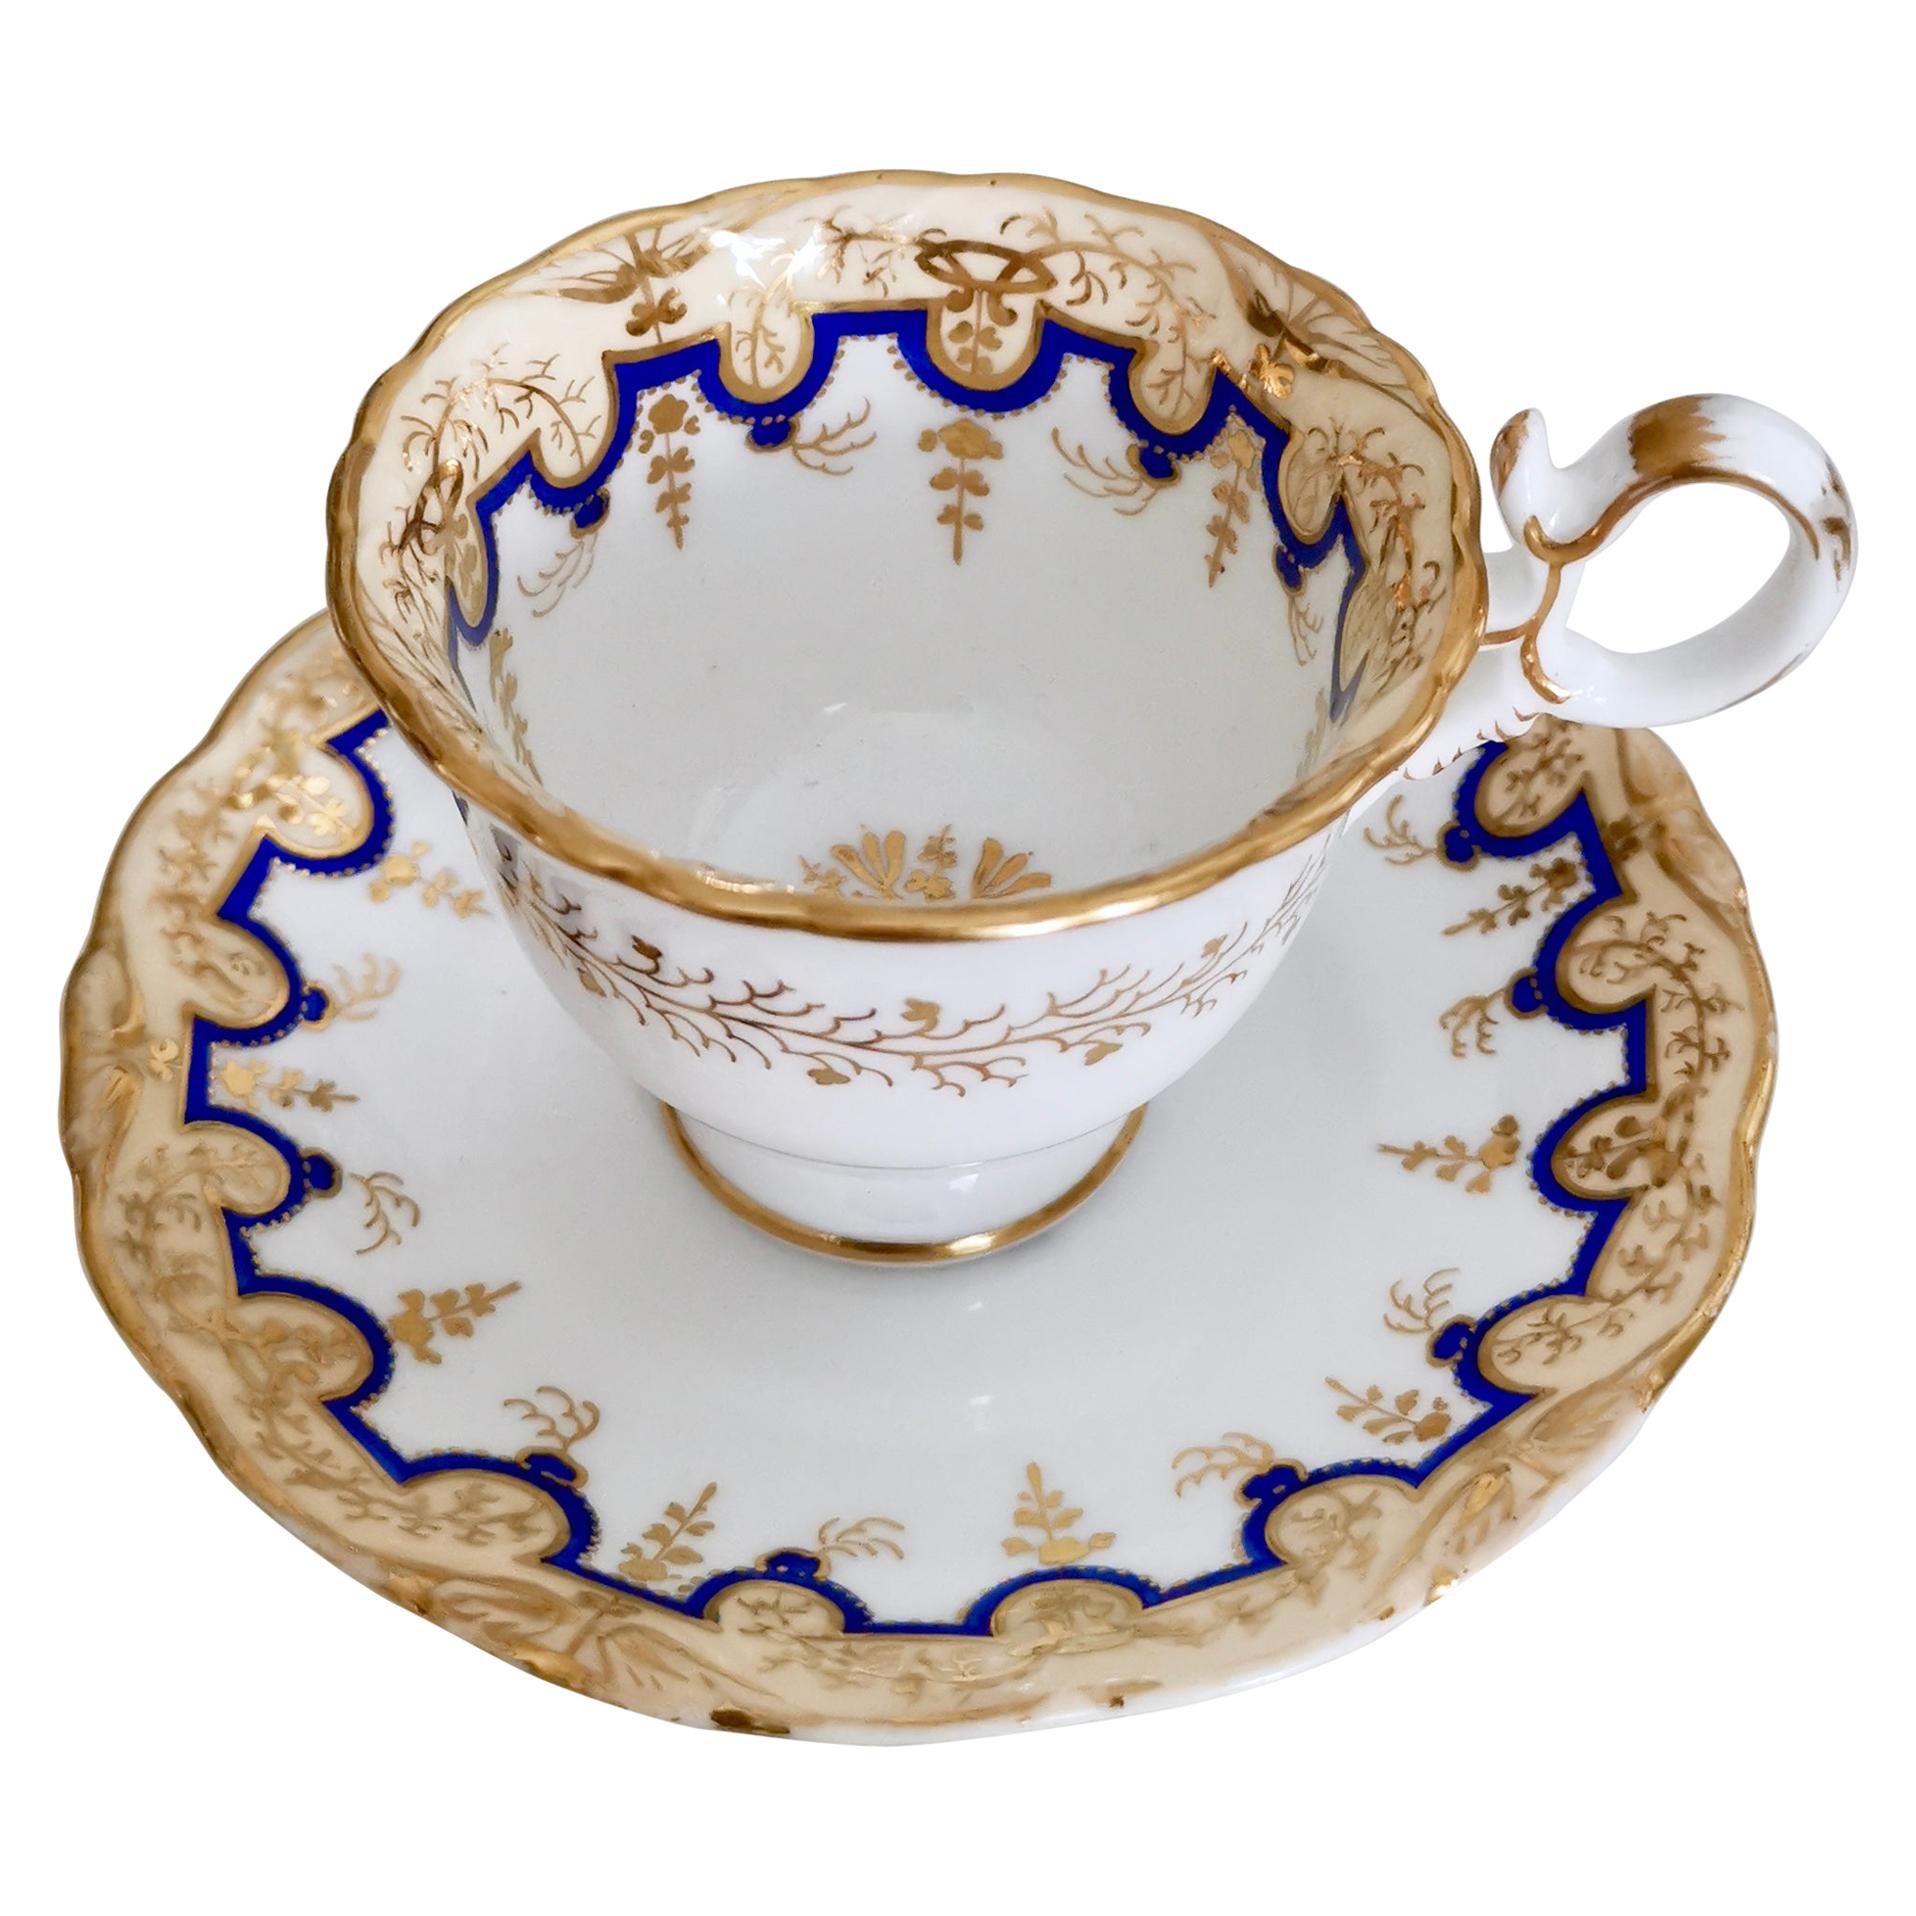 https://a.1stdibscdn.com/coalport-coffee-cup-and-saucer-adelaide-shape-circa-1835-for-sale/1121189/f_171092021575636553166/17109202_master.jpeg